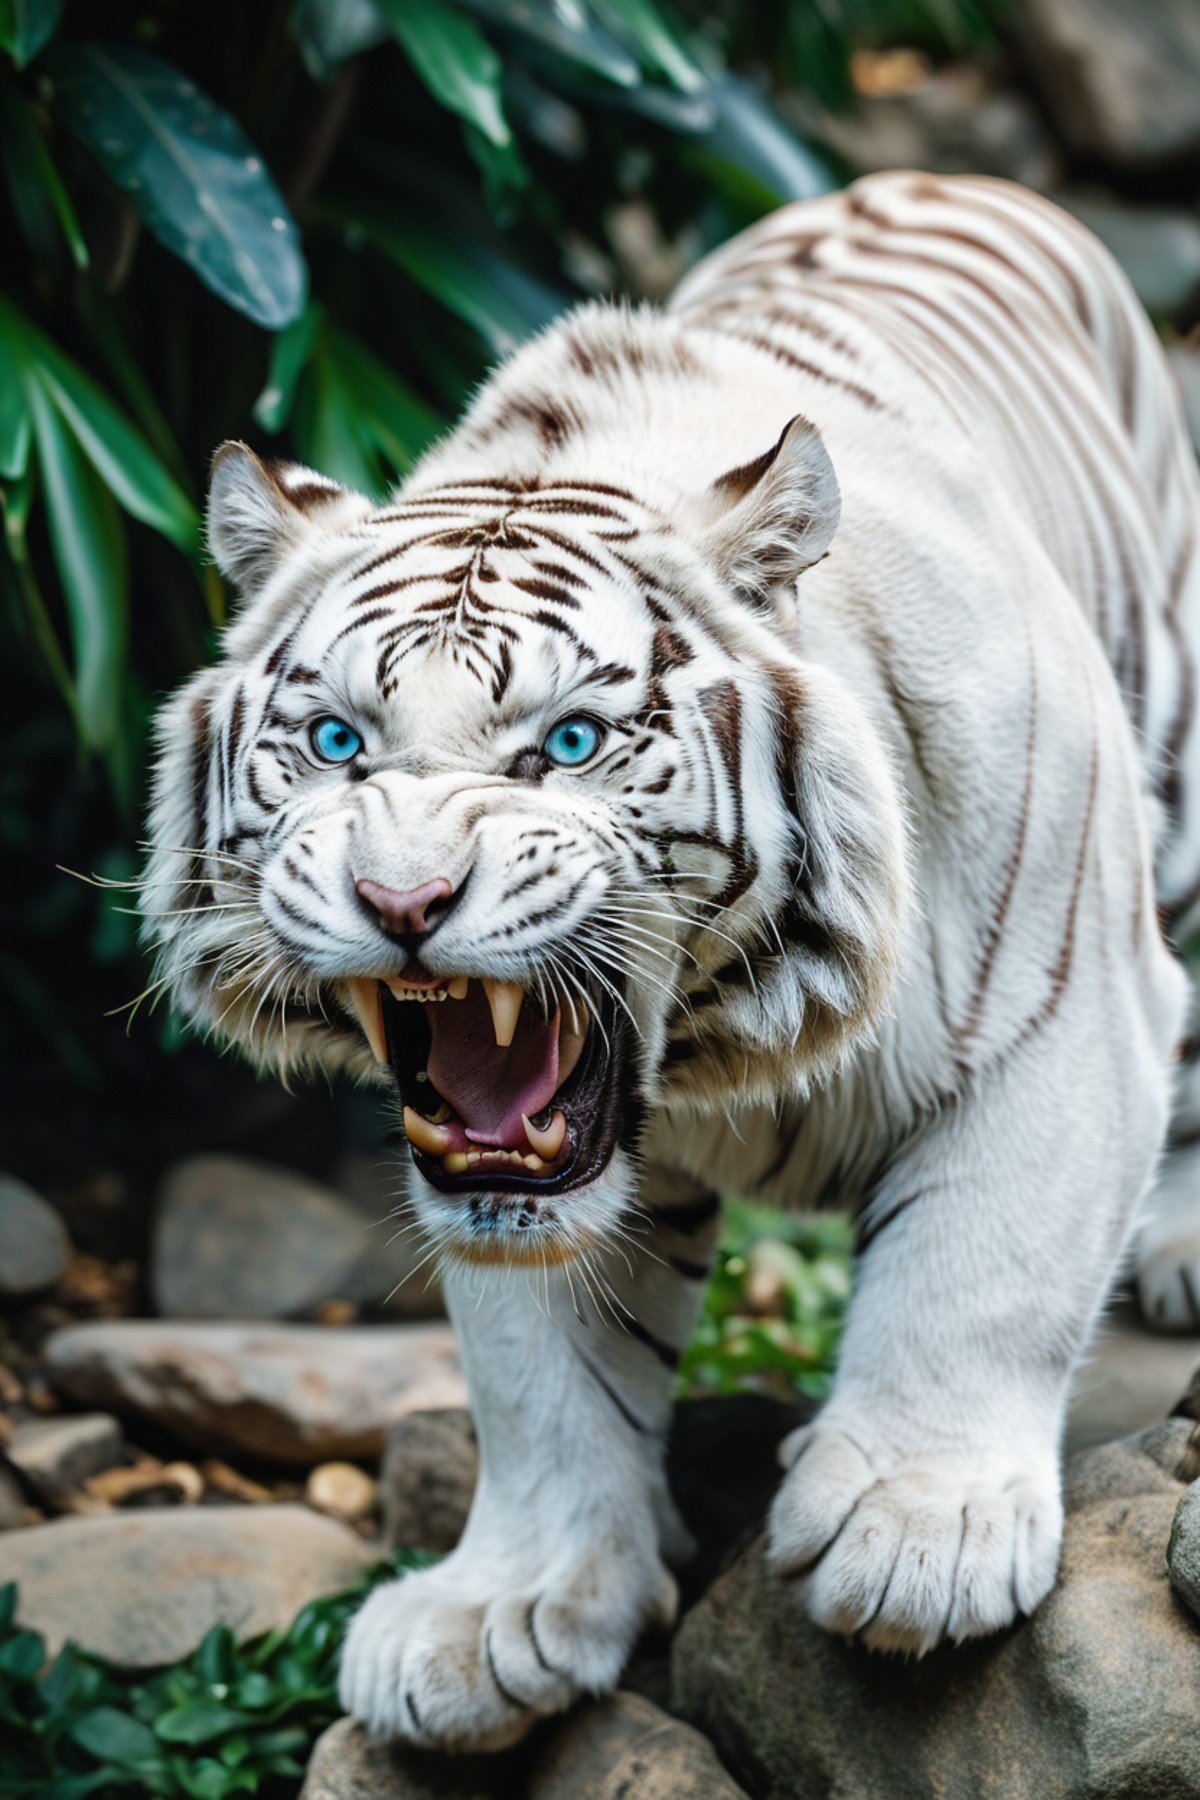 close-up of a roaring white tiger with black stripes, open mouth showing sharp teeth, intense blue eyes, green foliage and rocks blurred in the background, photorealistic detailing, natural sunlight highlighting whiskers and fur texture, animal portrait photography, masterpiece